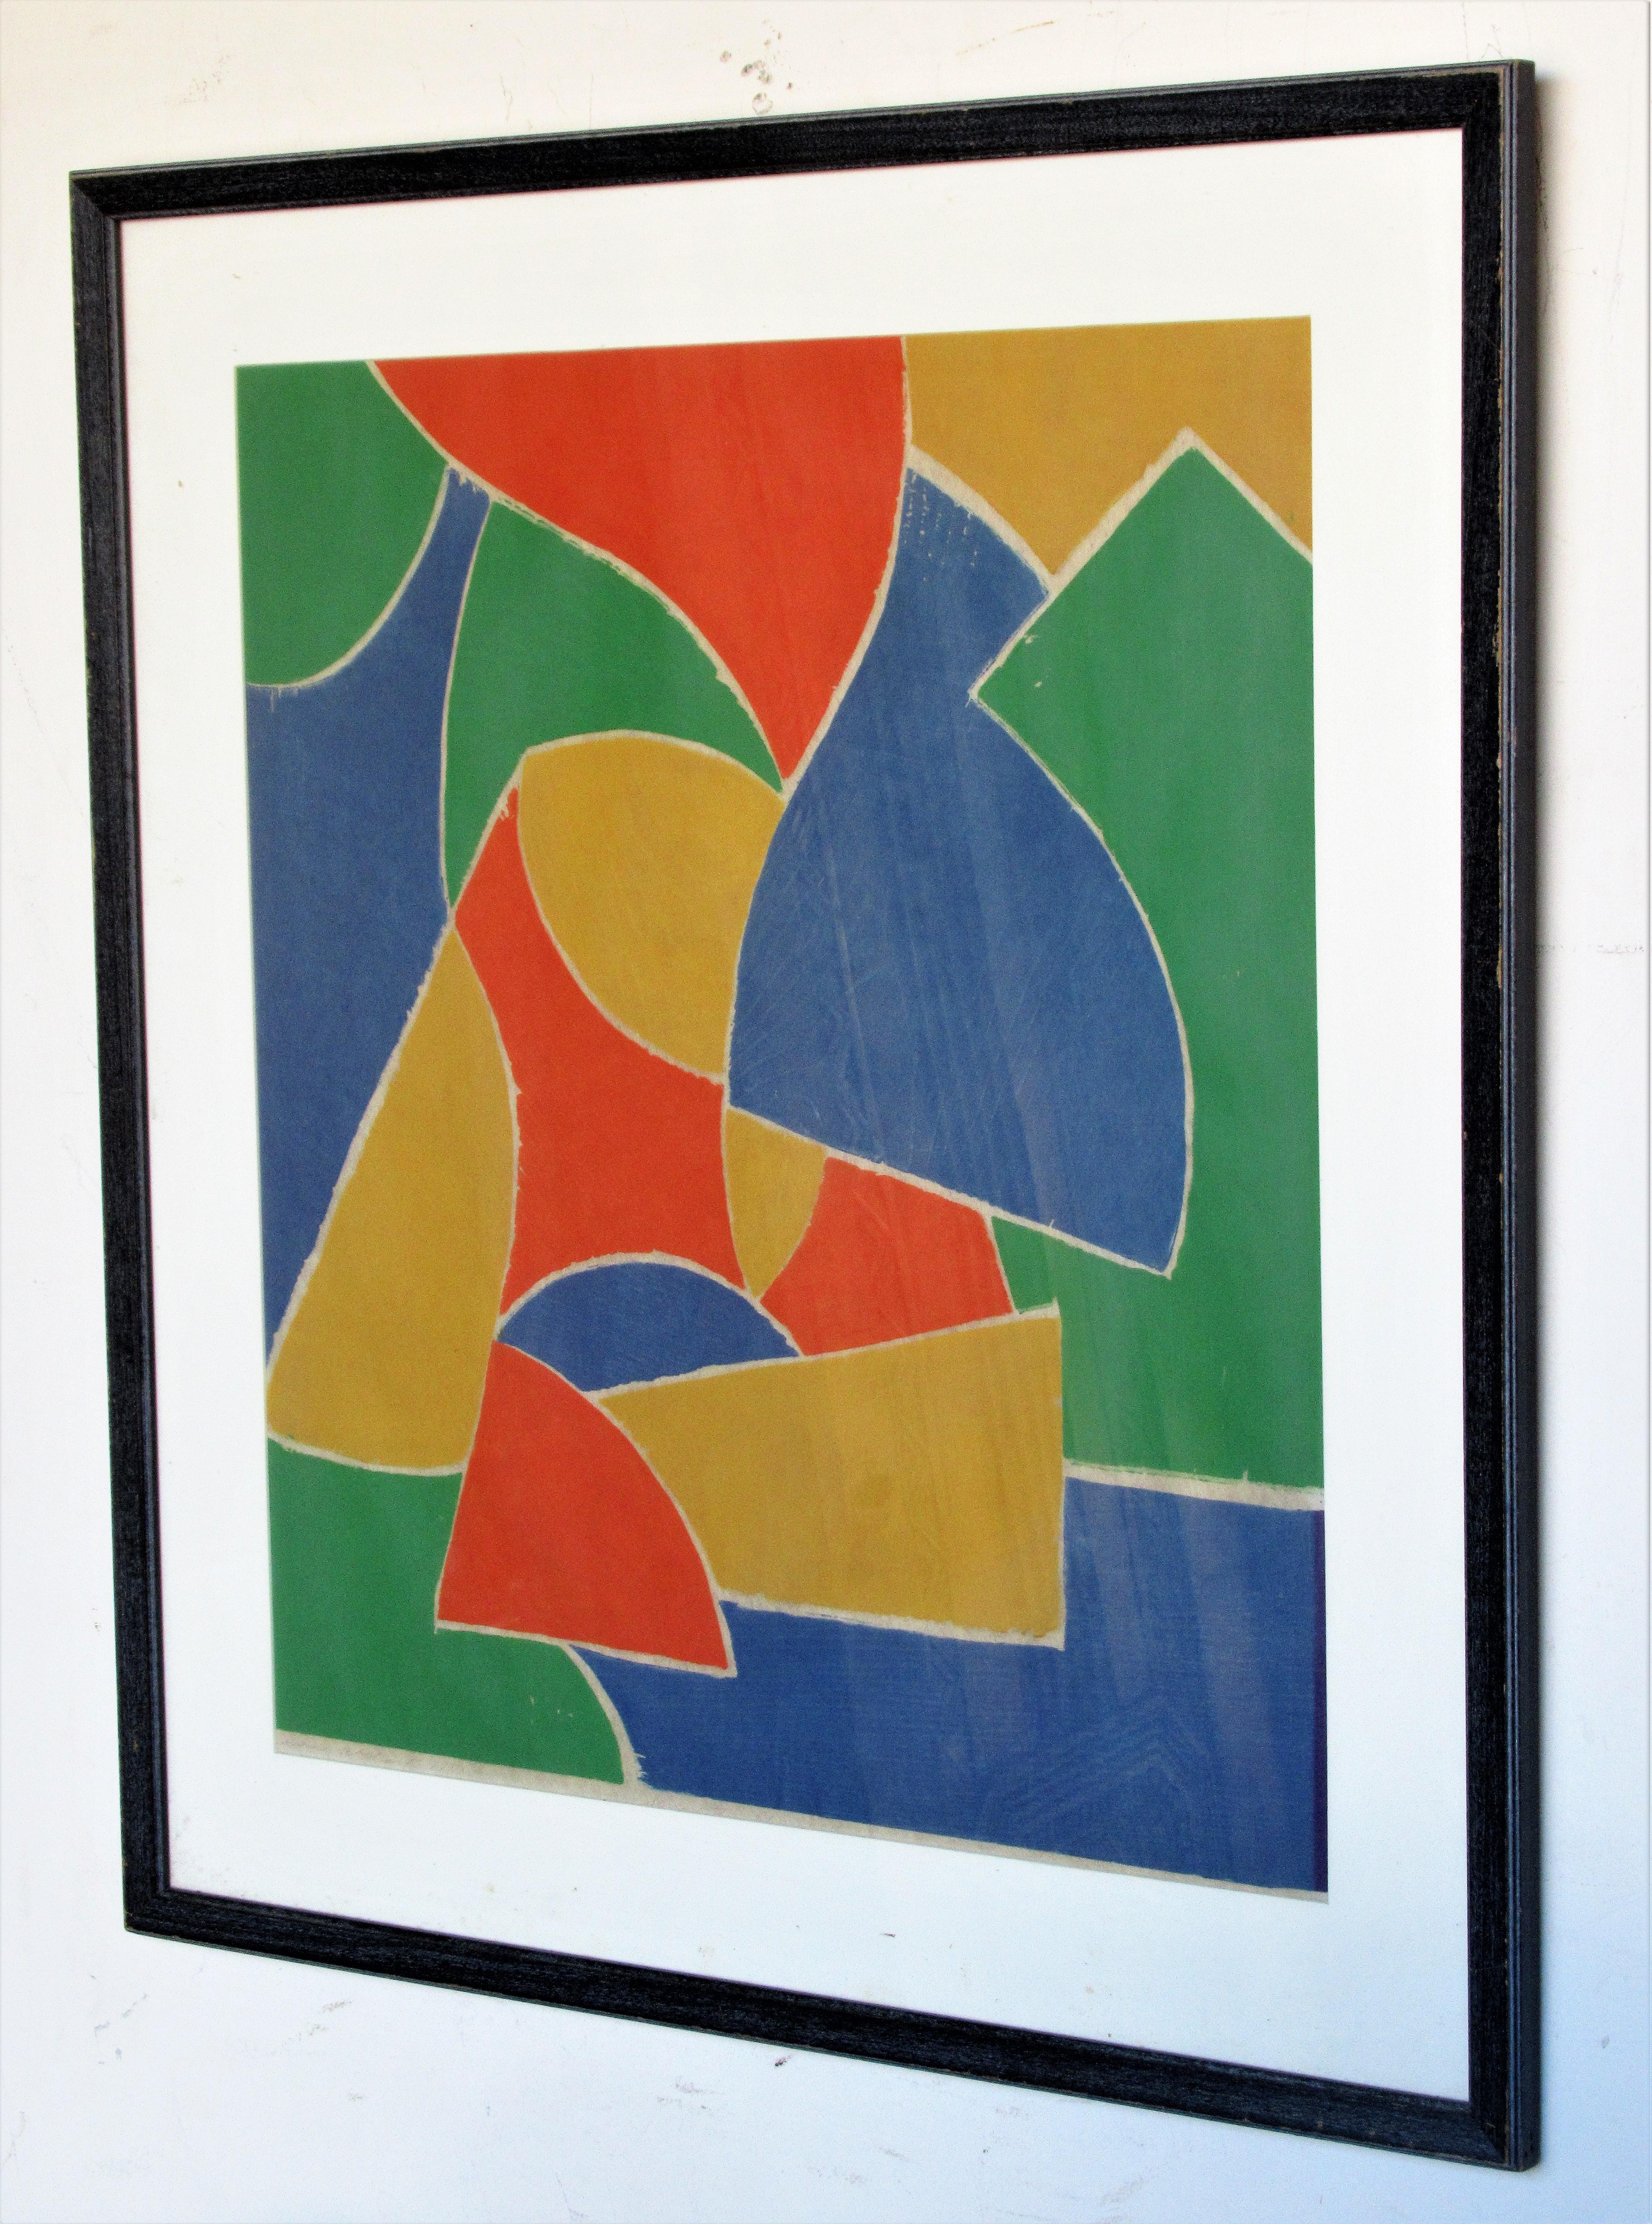 Two vibrant modernist abstract artist proof woodcut prints in the original period wood frames with matting. Pencil signed titled dated by artist bottom margins, Pat Blackmun, artist proof, 1971. Both were de-accessioned from the Memorial Art Gallery